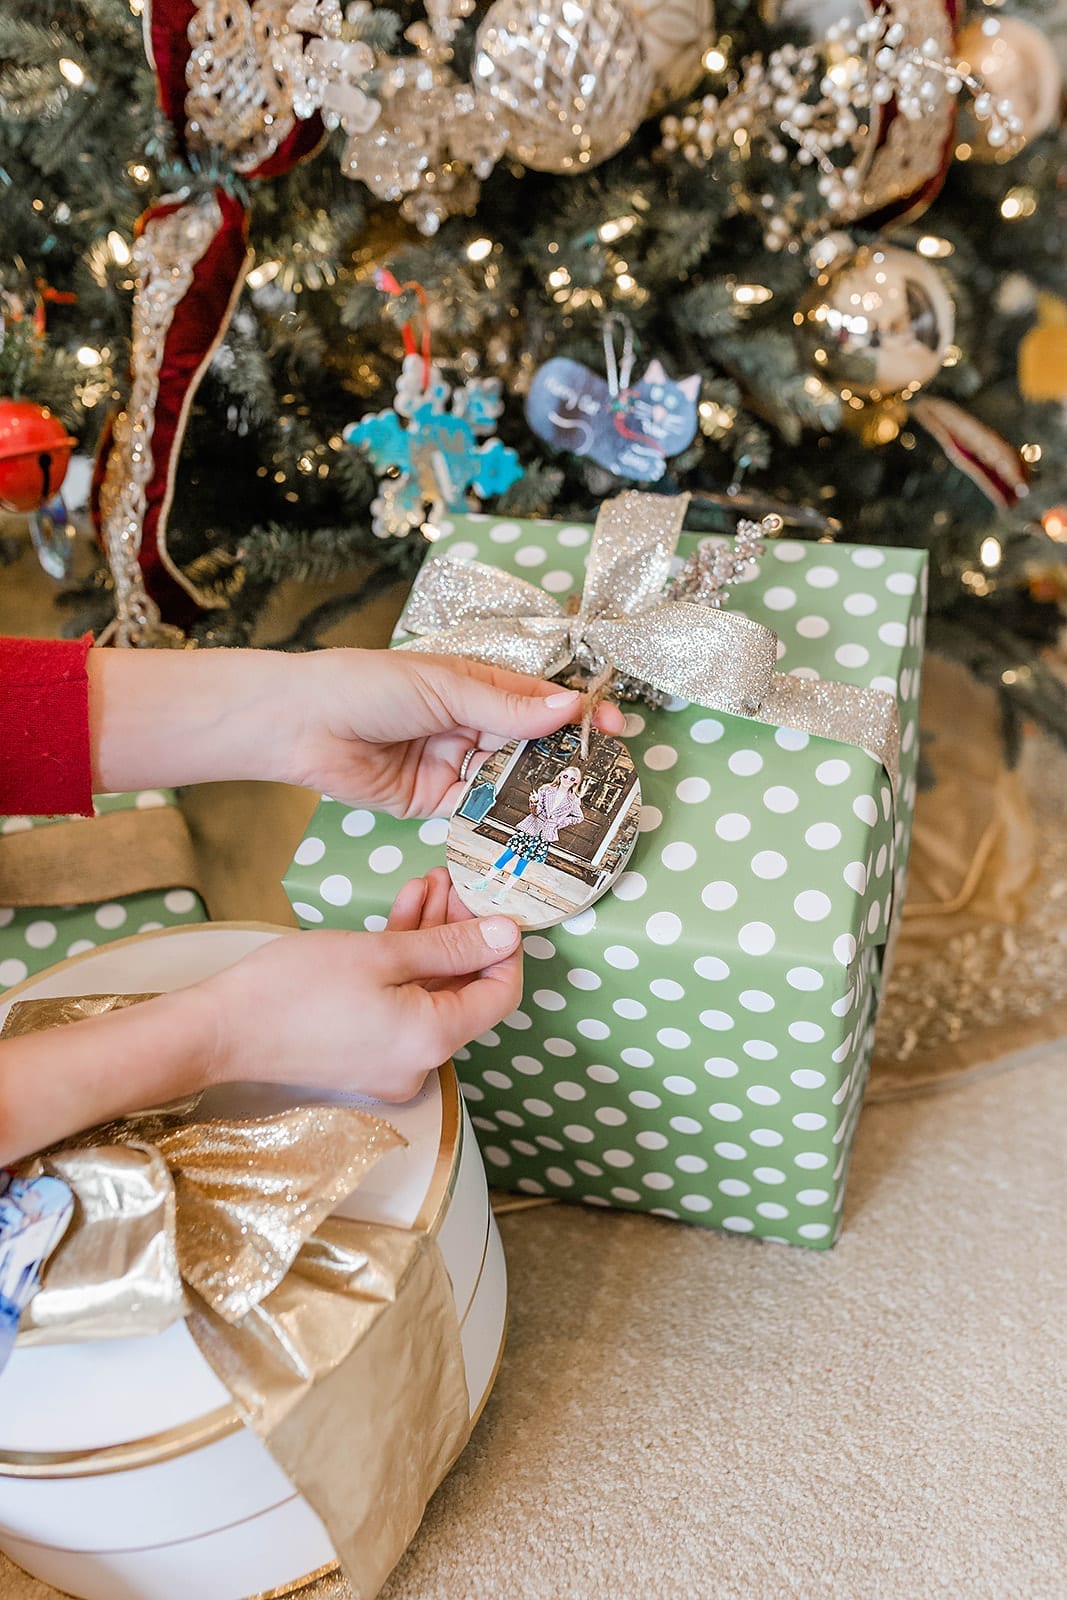 Kodak Moments Ornaments - cute way to wrap presents under the tree so everyone knows what gift belongs to whom. Easy way to preserve photos and memories.